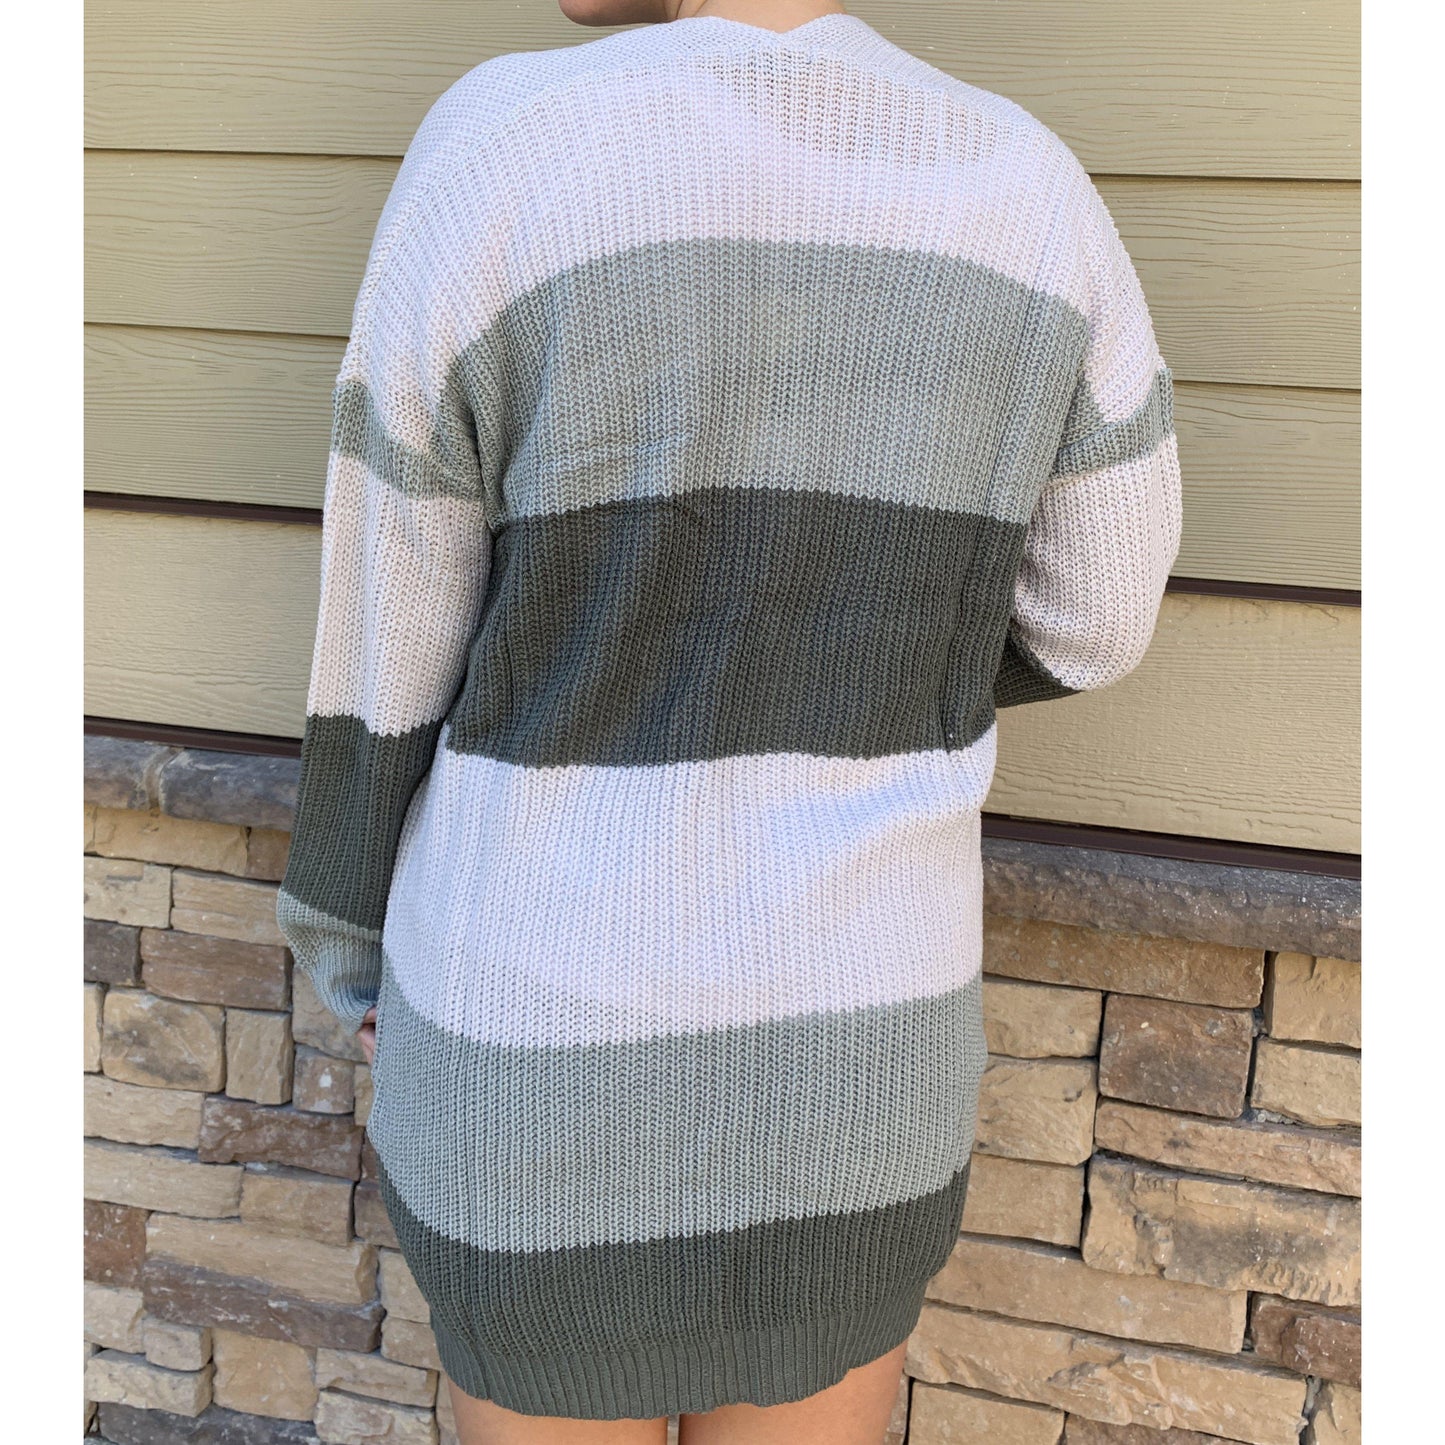 Our Striped Simply Southern Cardigans are lightweight, true to size, and adorable. Longer length and will travel easy.